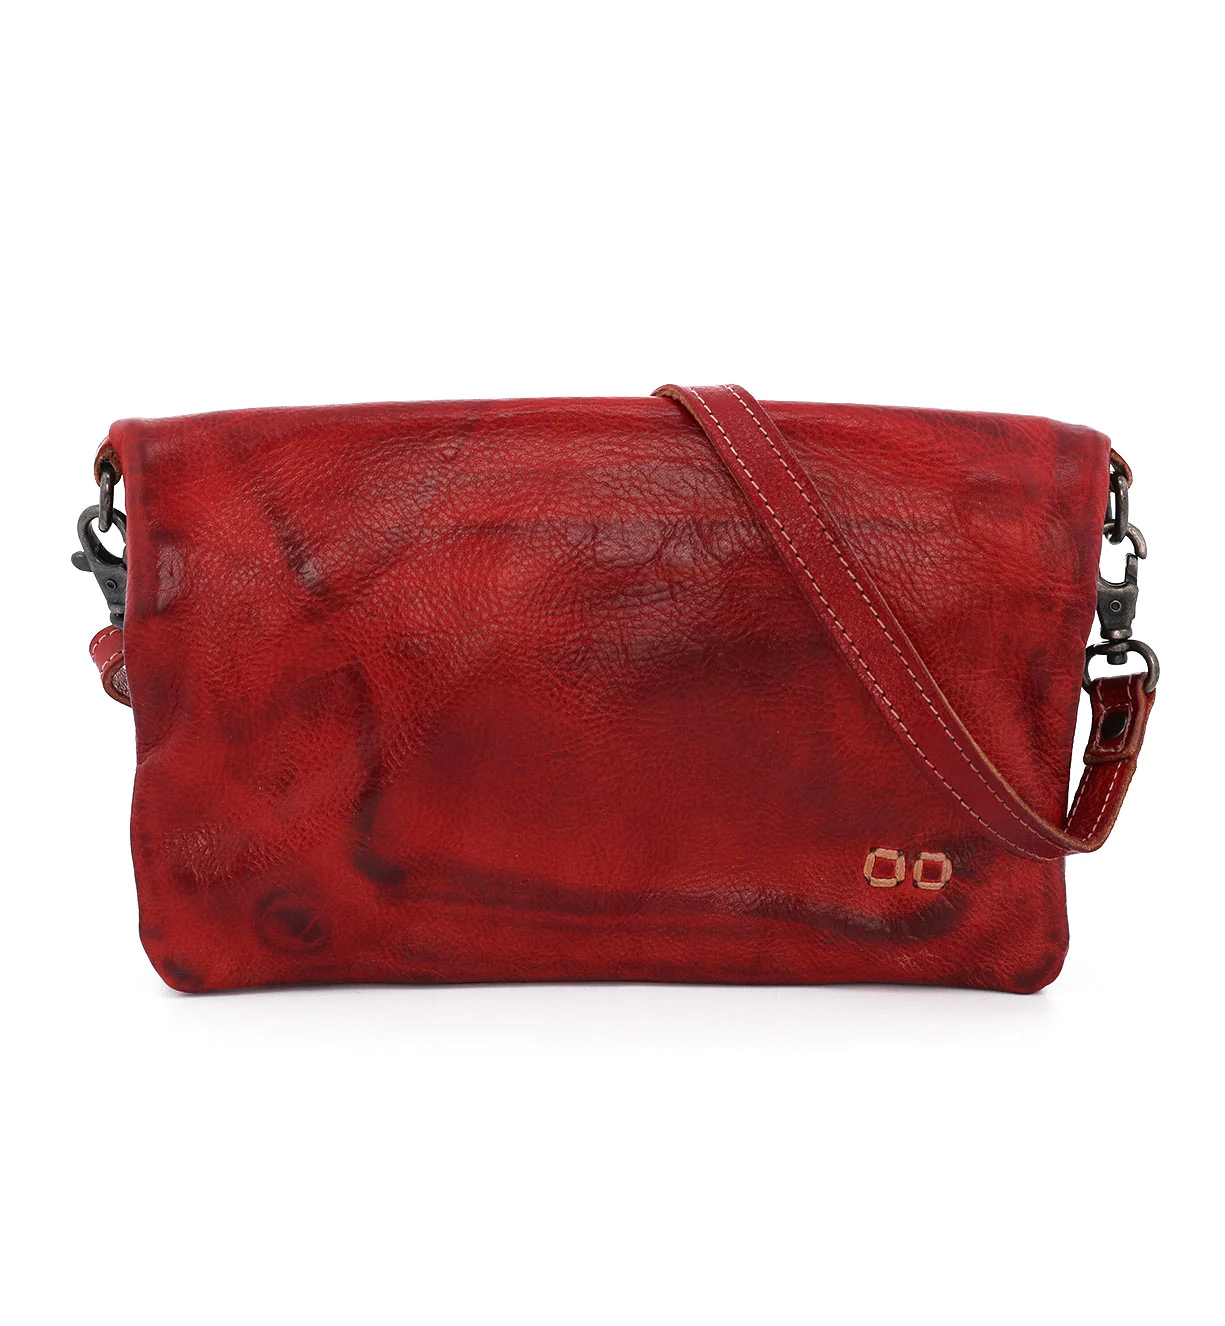 Bed Stu Cadence Hobo Wallet in Red Rustic - SpiritedBoutiques Boho Hippie Boutique Style General, Bed Stu